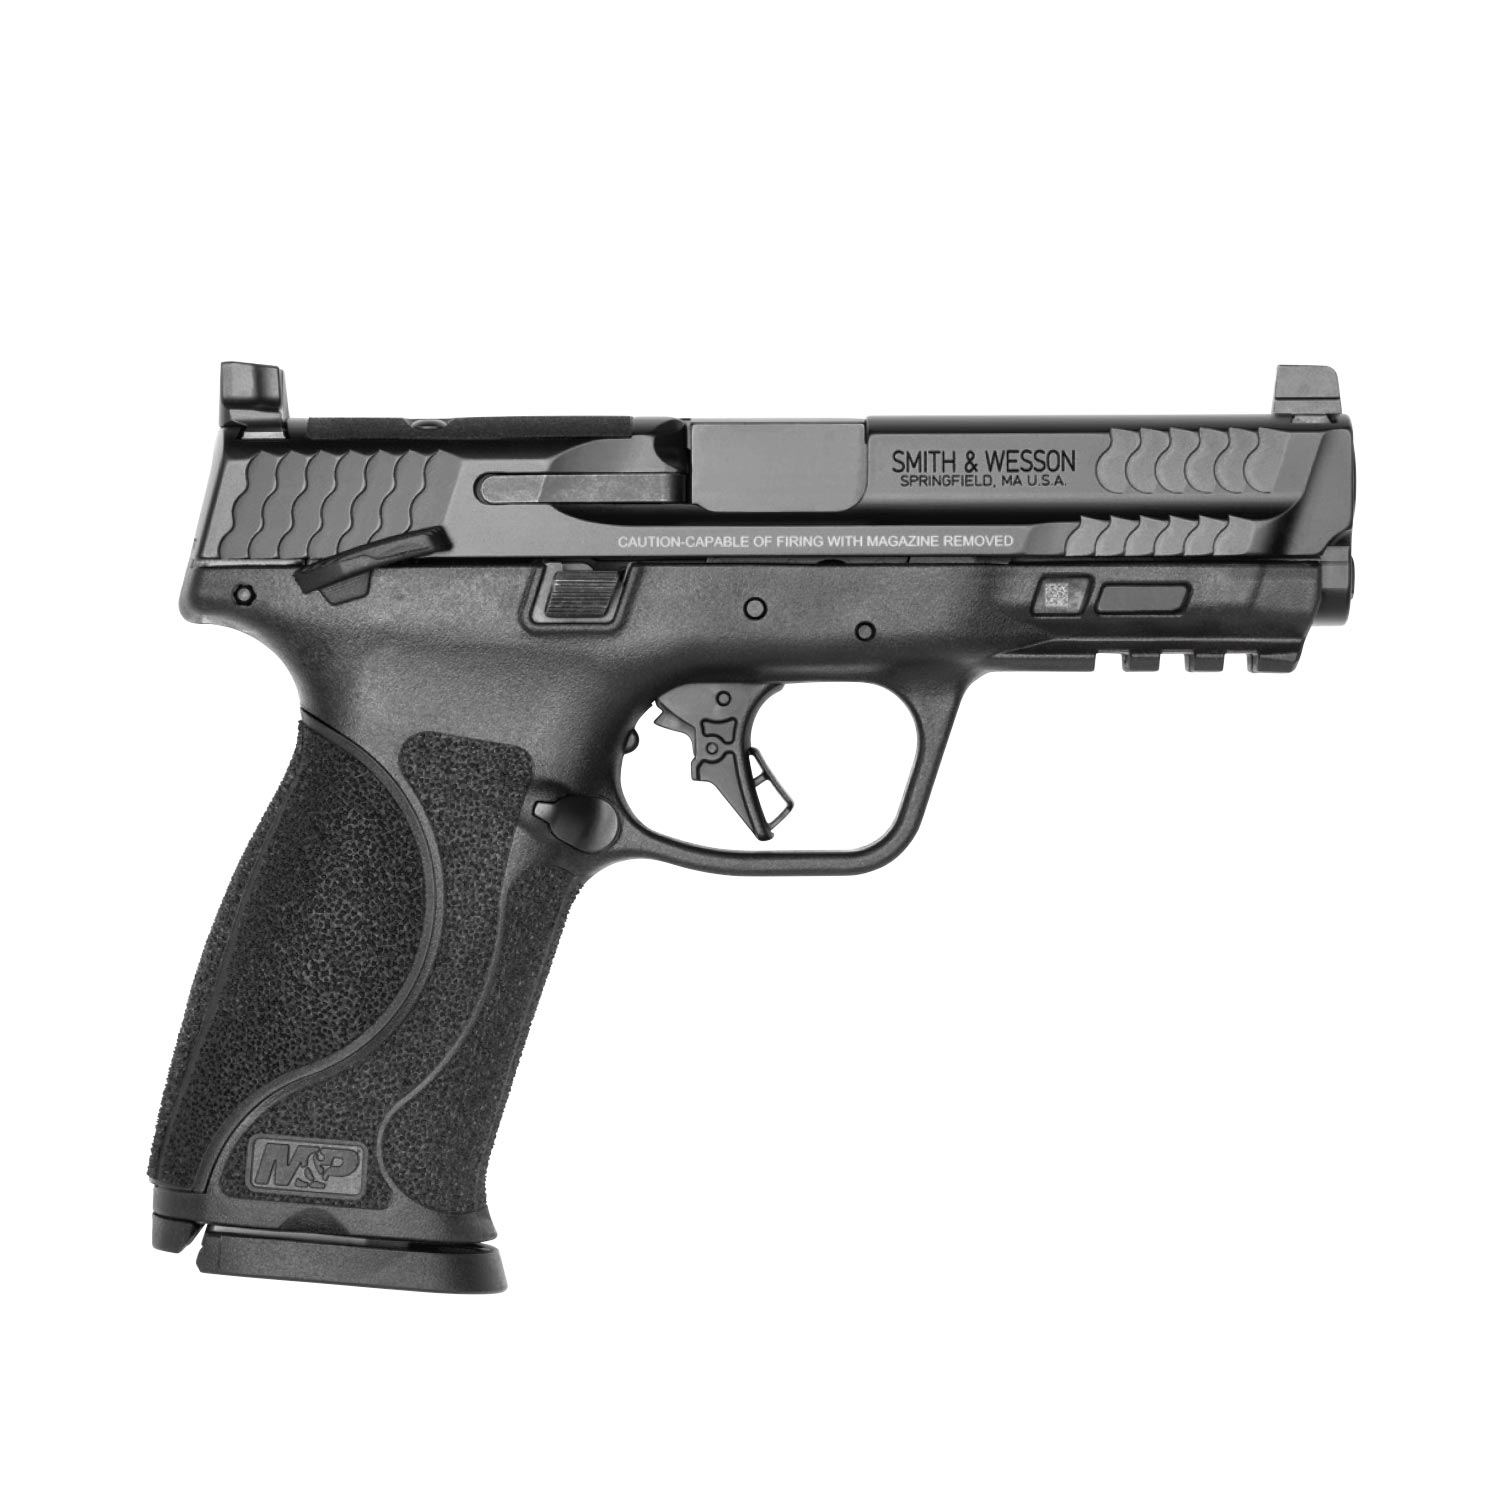 Smith & Wesson M&P9 M2.0 9mm Full Size Pistol w/ Thumb Safety